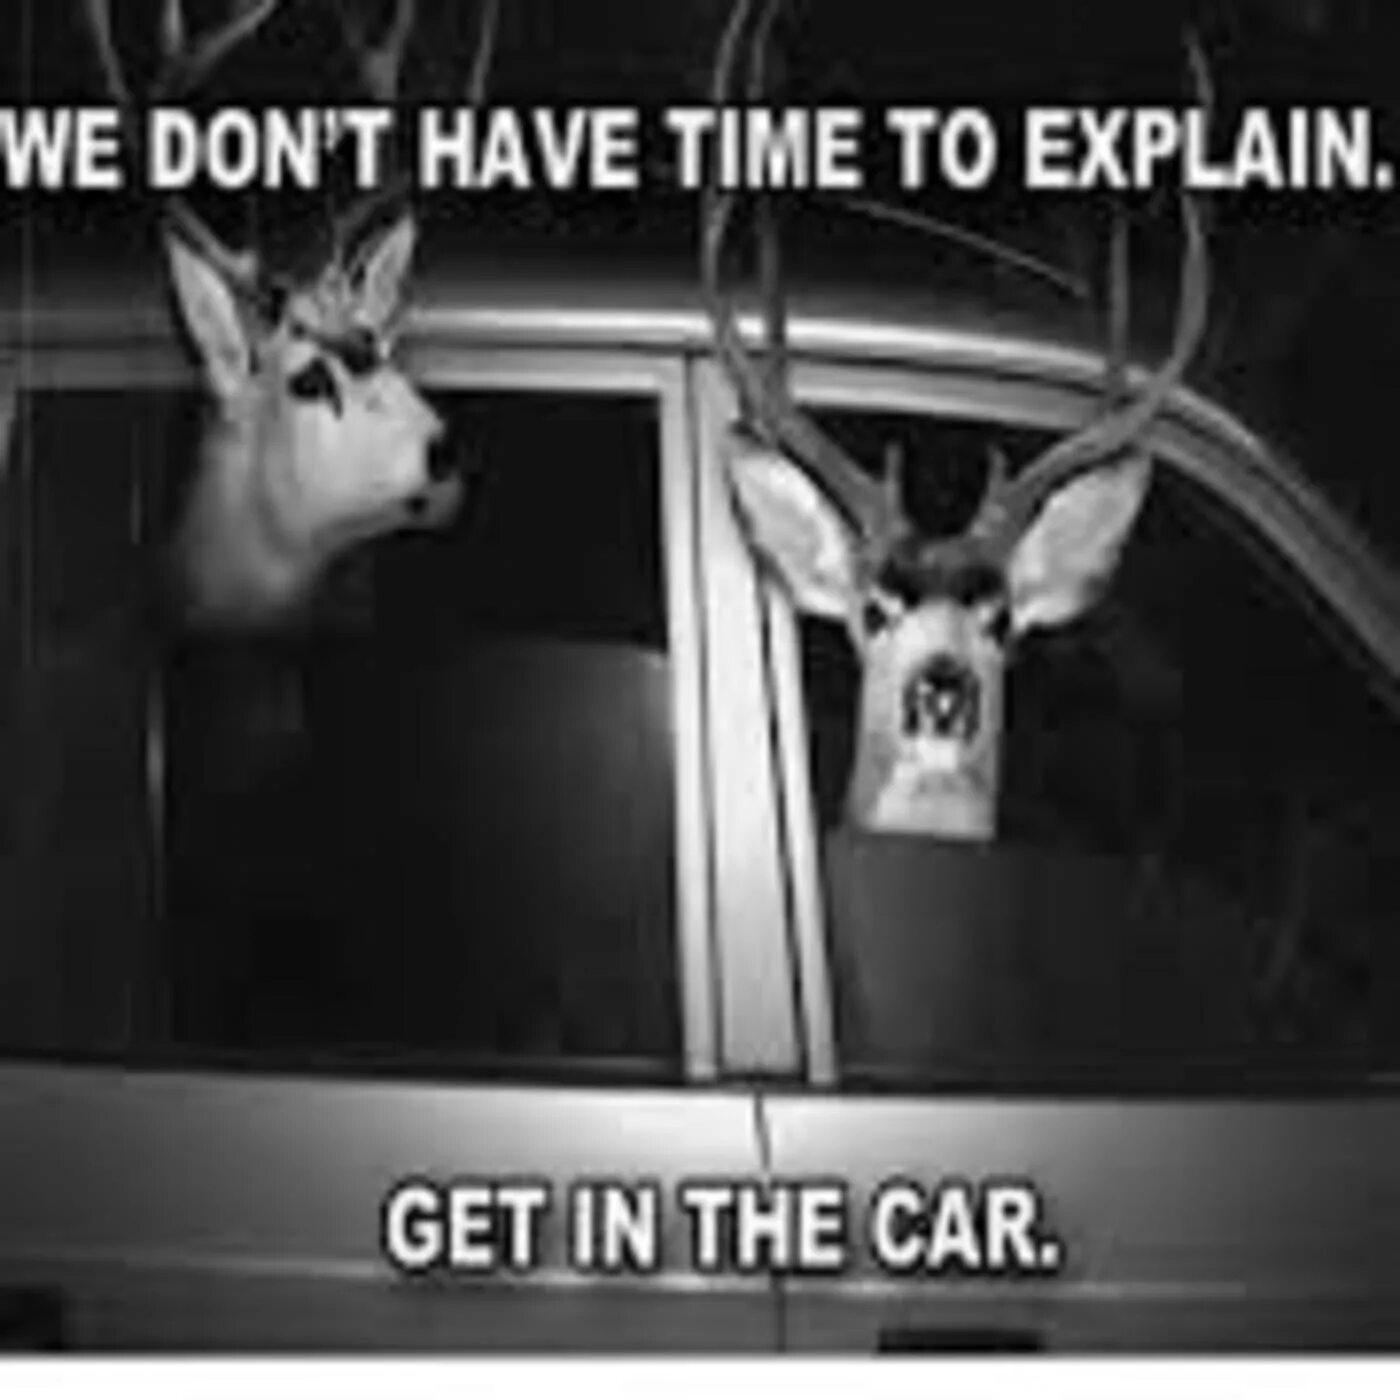 It s hard to explain. No time to explain get in the car. Get in the car Мем. No time to explain. Олени Мем no time to explain.